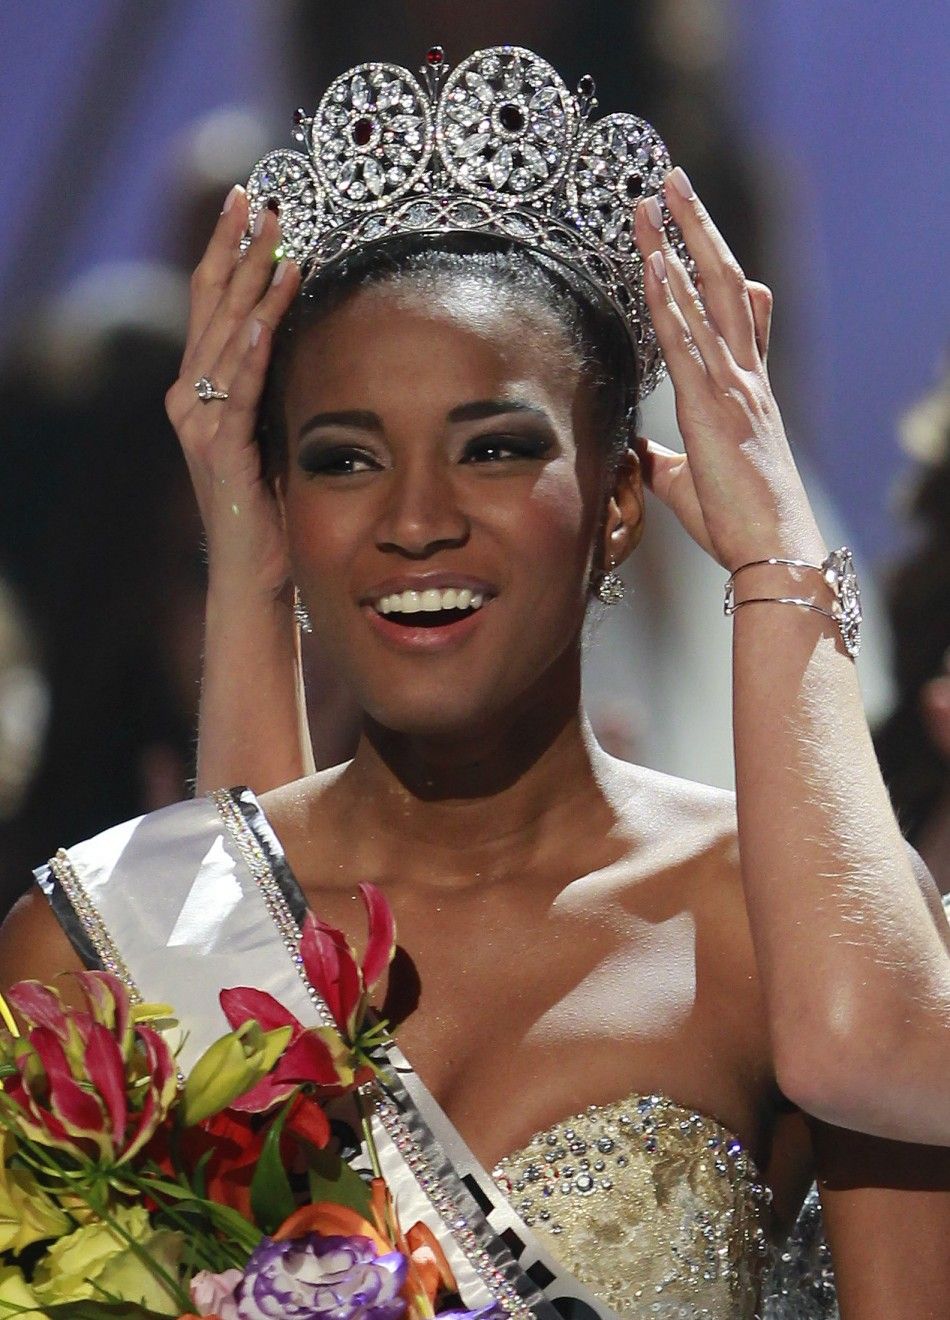 The Crowned Miss Universe Will Help in Fighting HIV